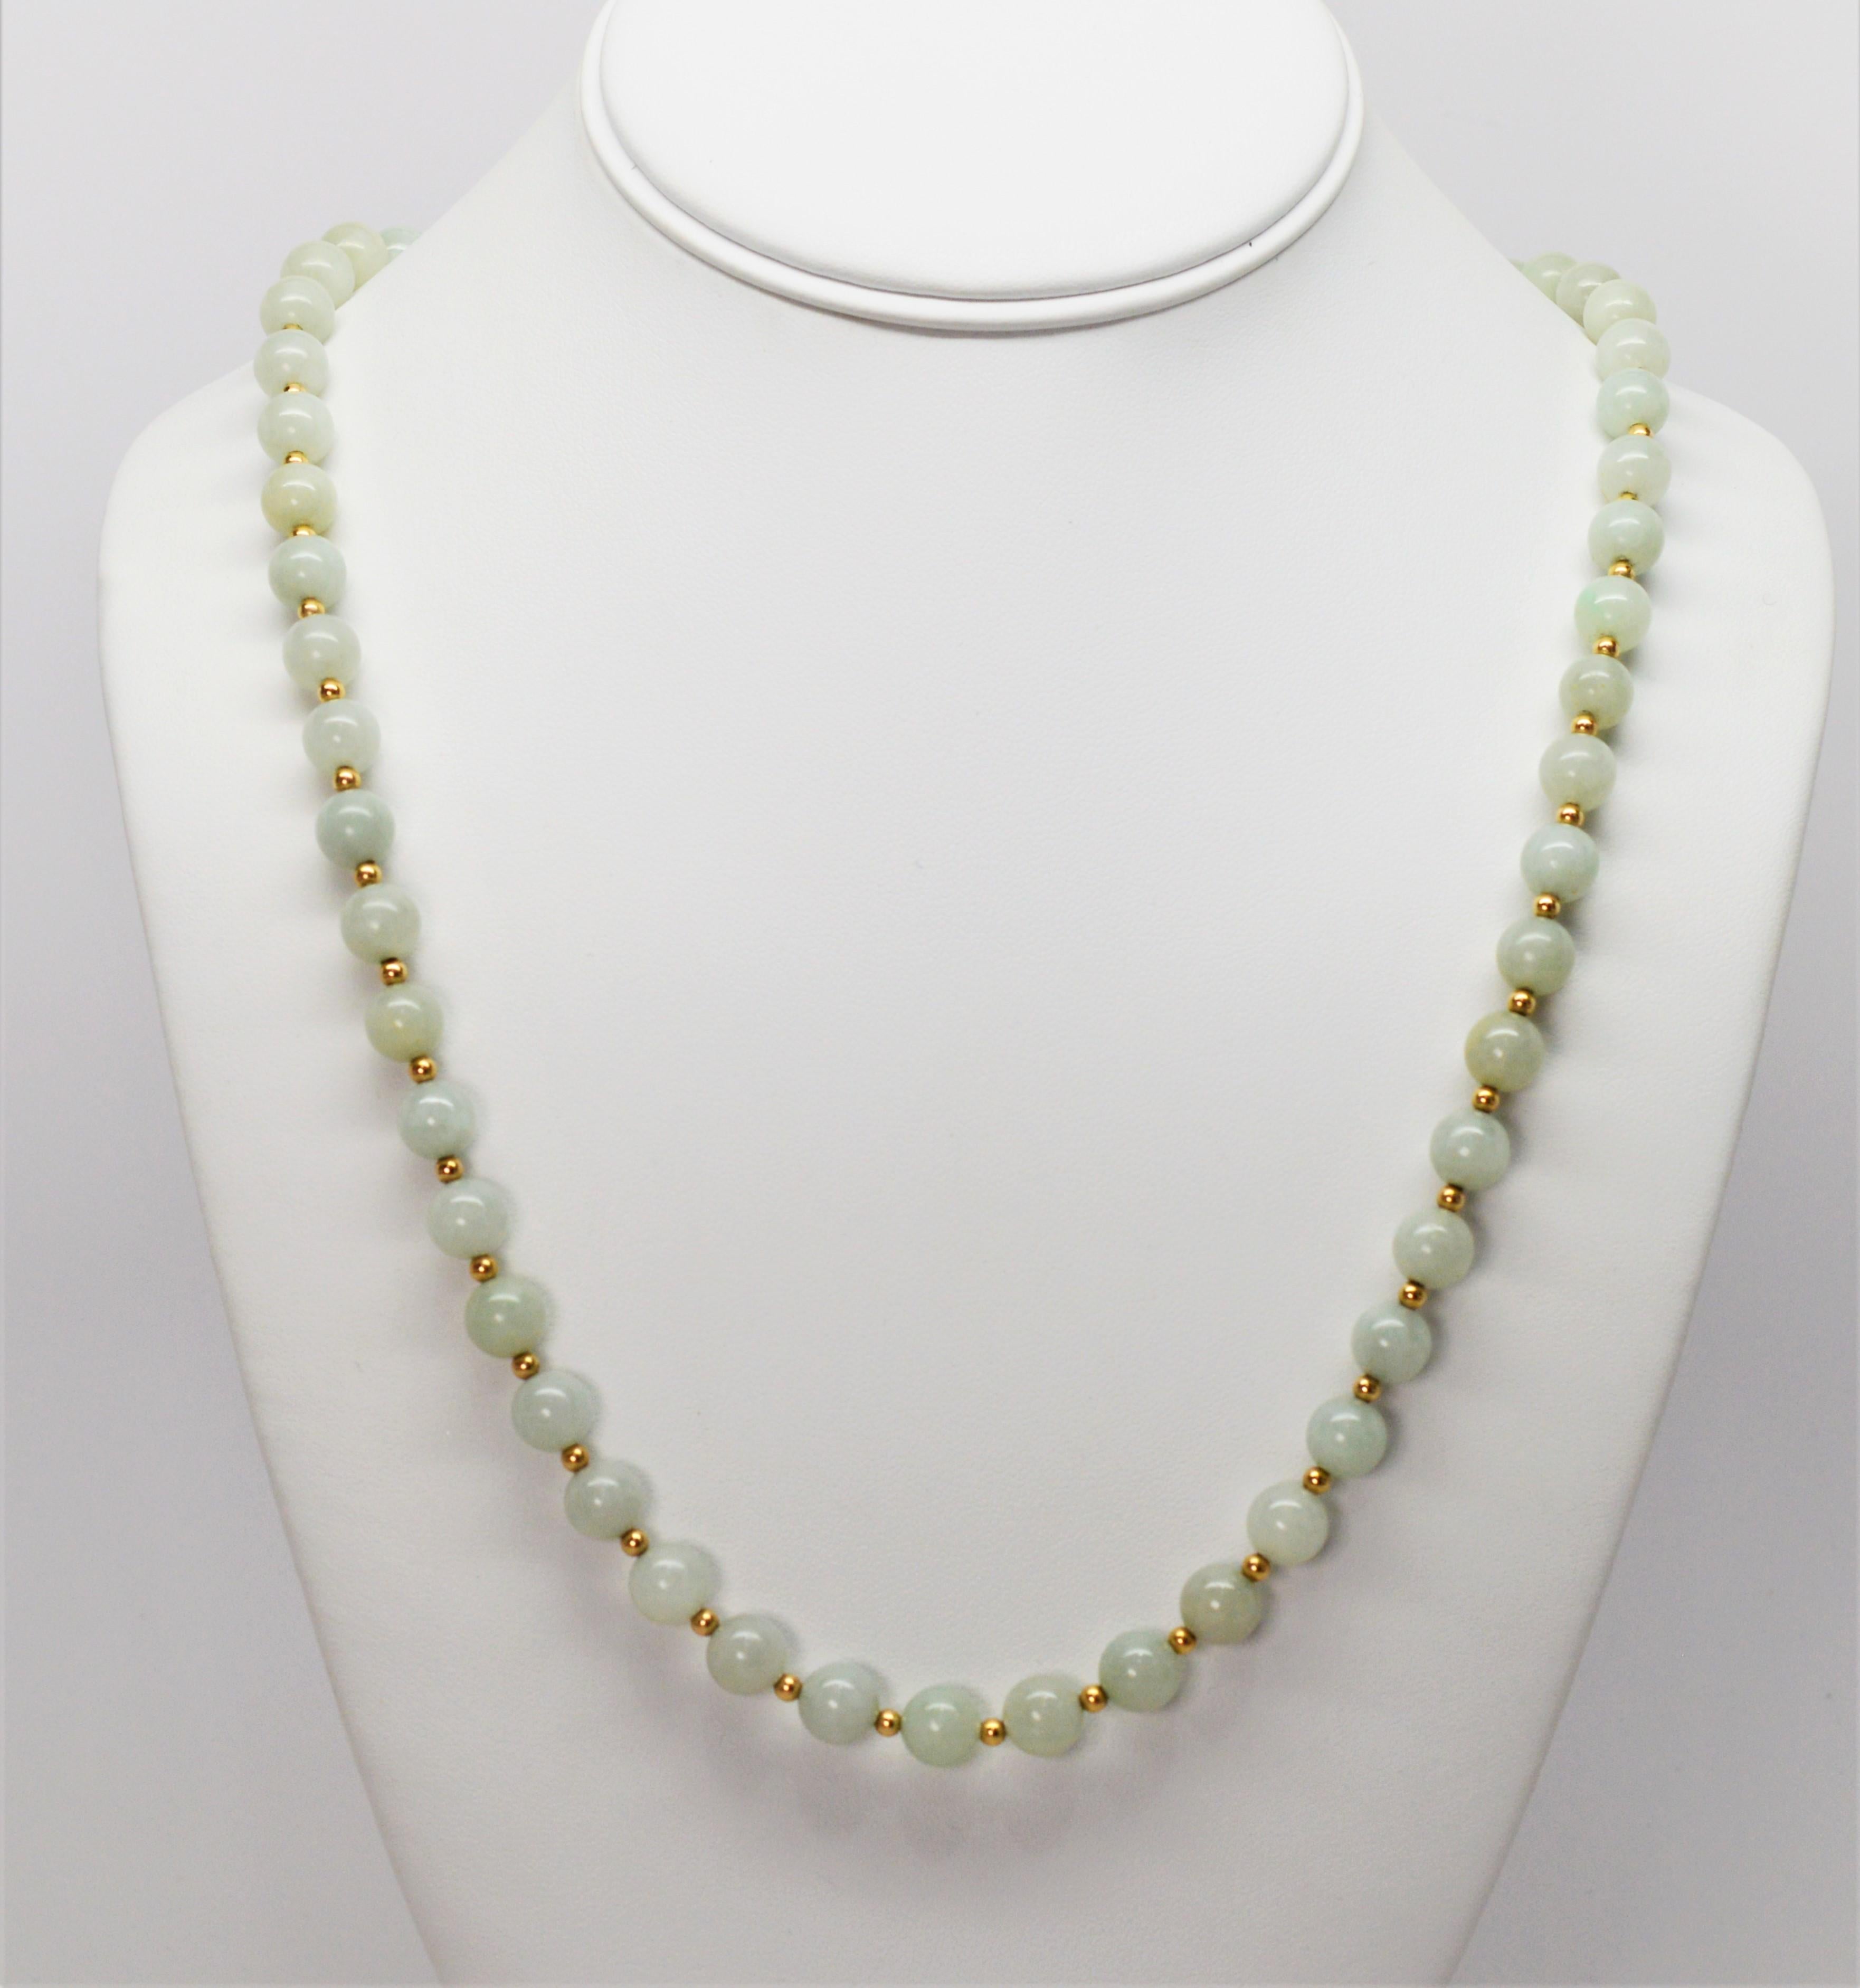 Serene, in a soft moss green shade, seventy one natural jadeite hand strung beads create this twenty eight inch necklace accented with tiny fourteen carat yellow gold beads that enhance the natural hues and veining of the  8 mm jadeite beads. In